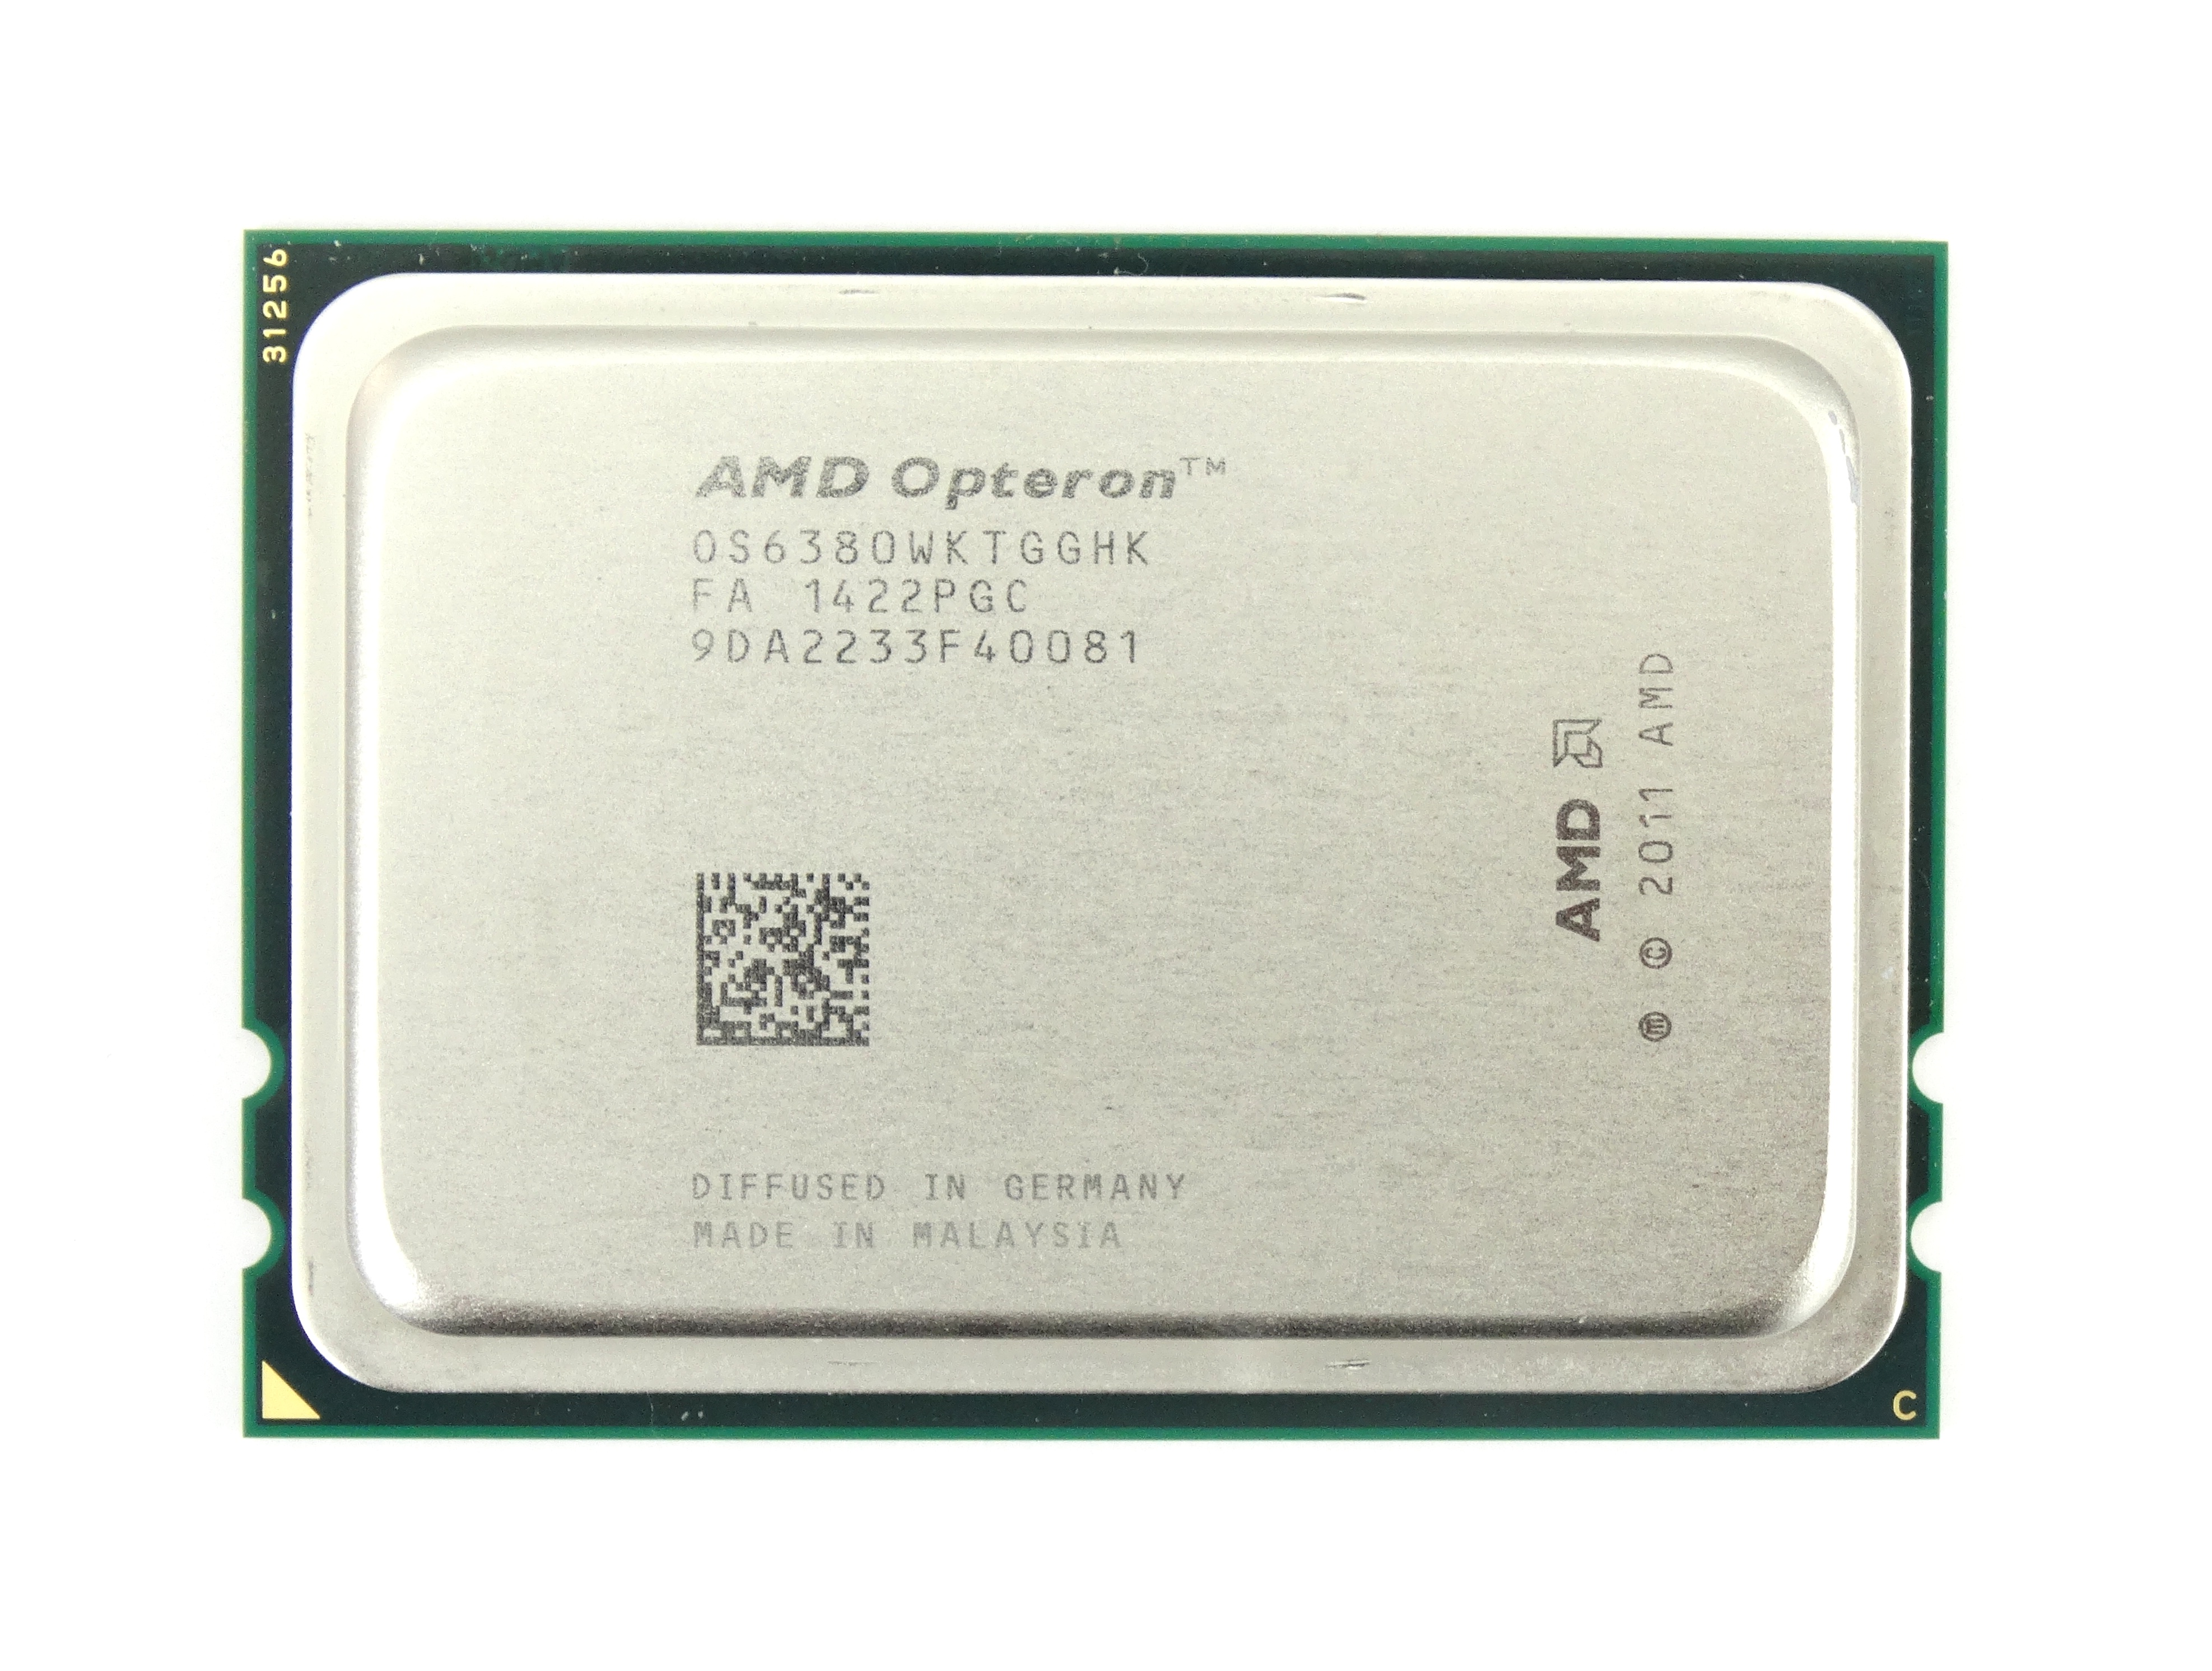 AMD OPTERON 16 CORE 6380 2.5GHZ 16MB L3 CACHE PROCESSOR (OS6380WKTGGHK)